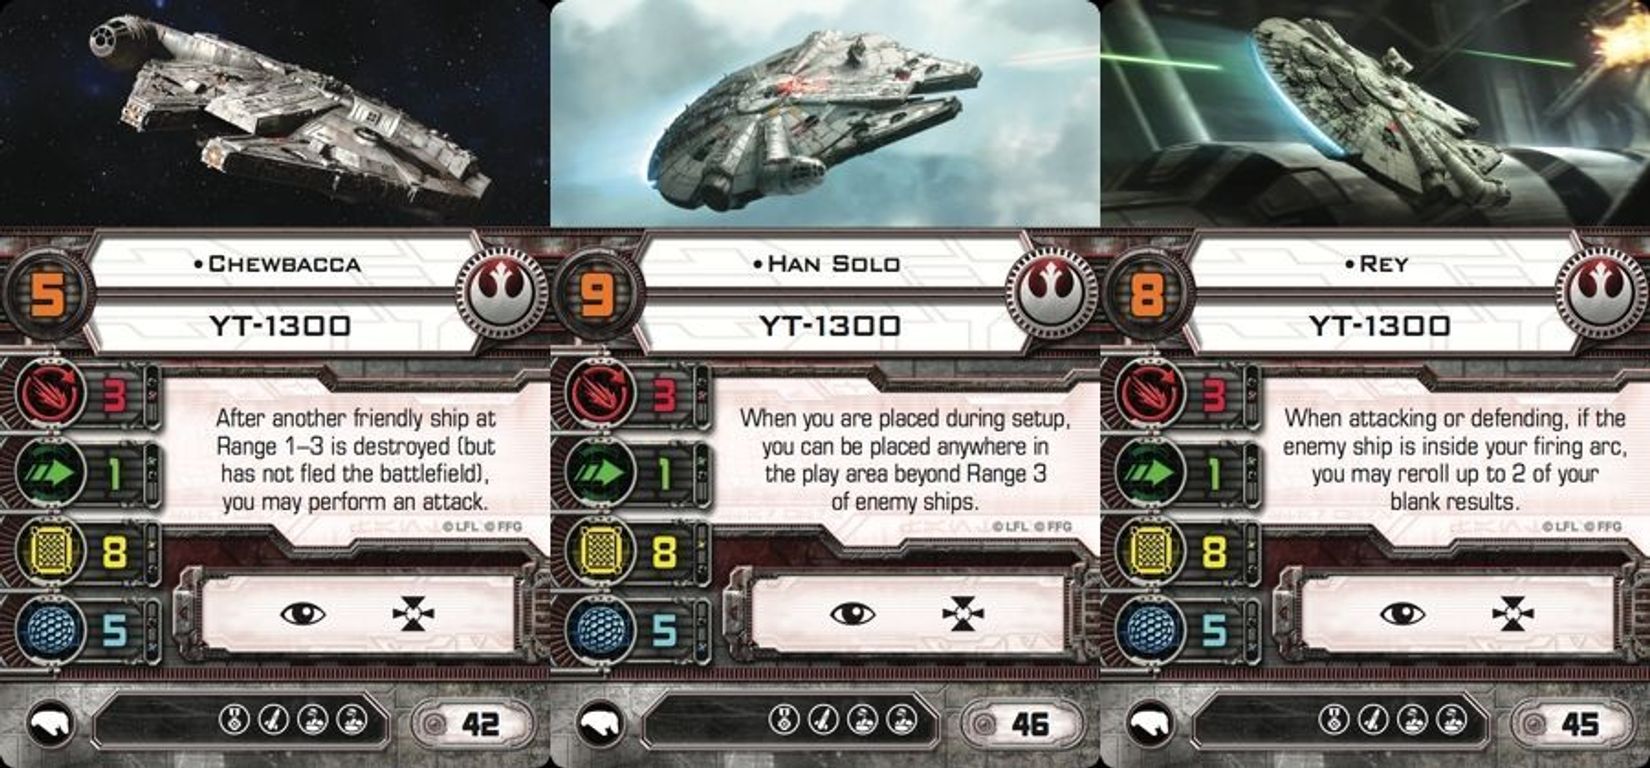 Star Wars: X-Wing Miniatures Game - Heroes of the Resistance Expansion Pack kaarten